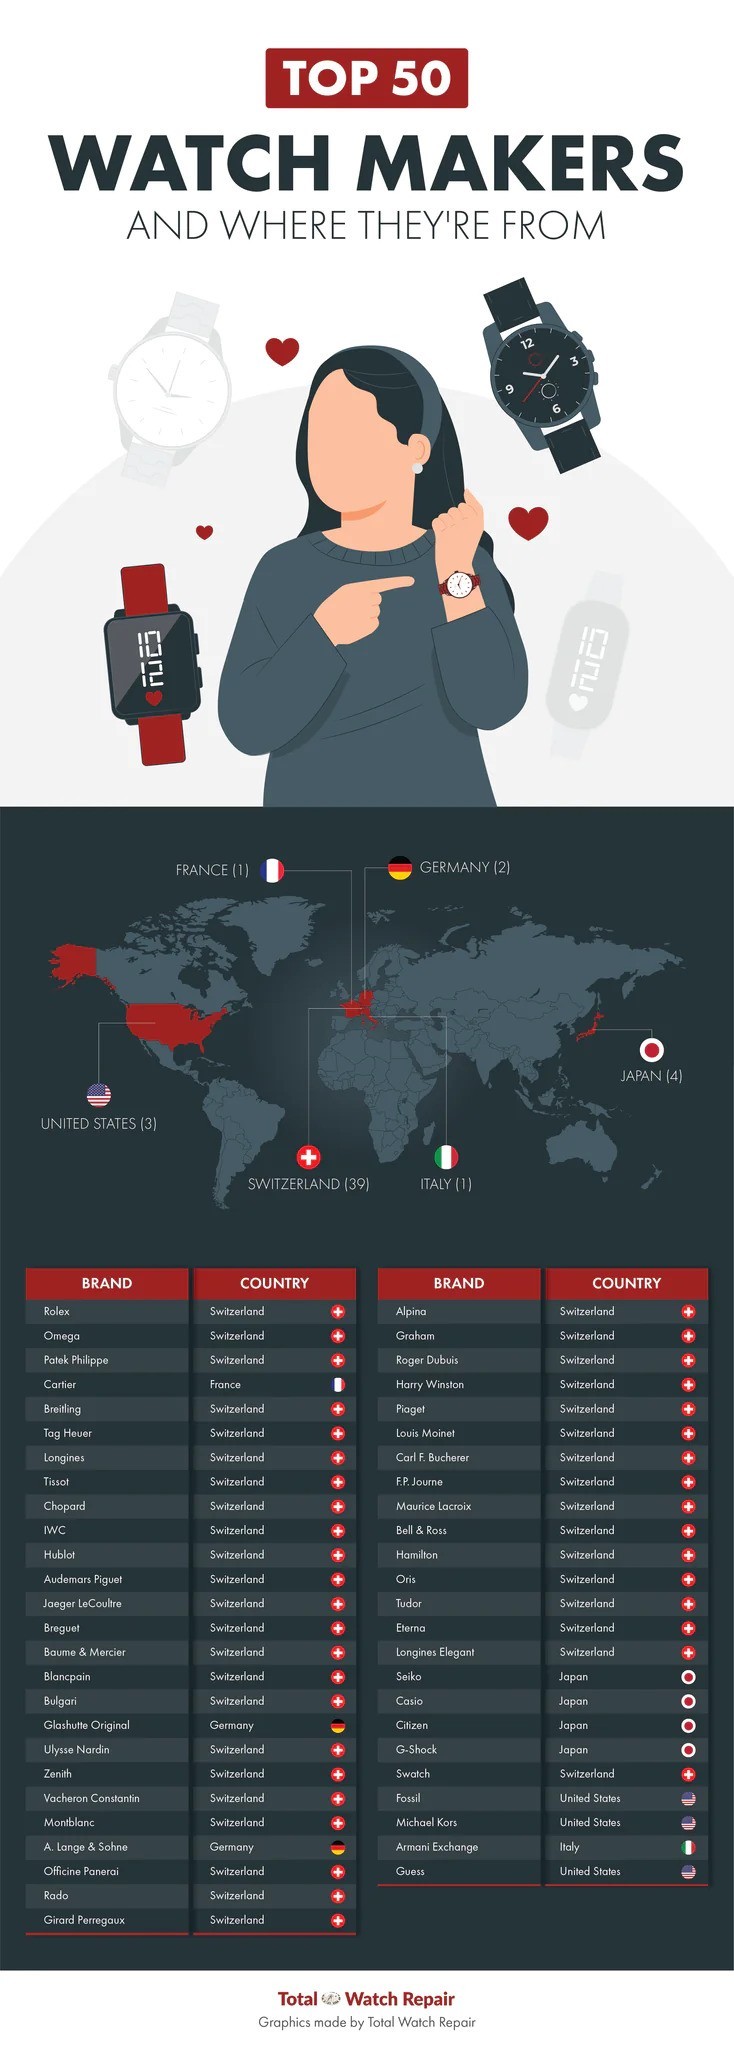 Top 50 Watch Makers and Where They're From [Infographic]